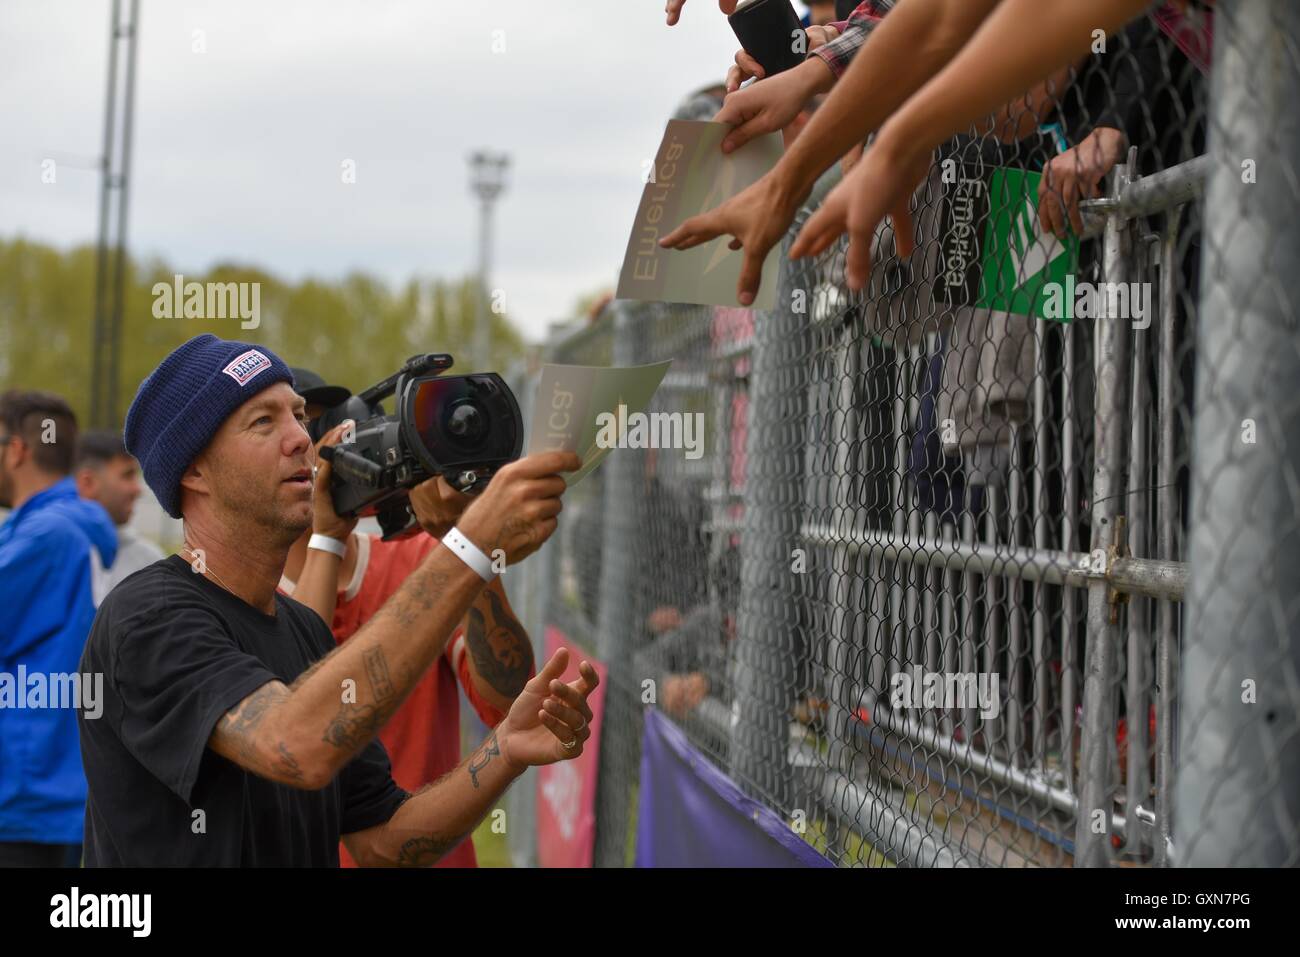 Buenos Aires, Argentina. 16 Sept, 2016. Andrew Reynolds during Emerica skateboard team demo at Tecnopolis in Buenos Aires, Argentina. Credit:  Anton Velikzhanin/Alamy Live News Stock Photo